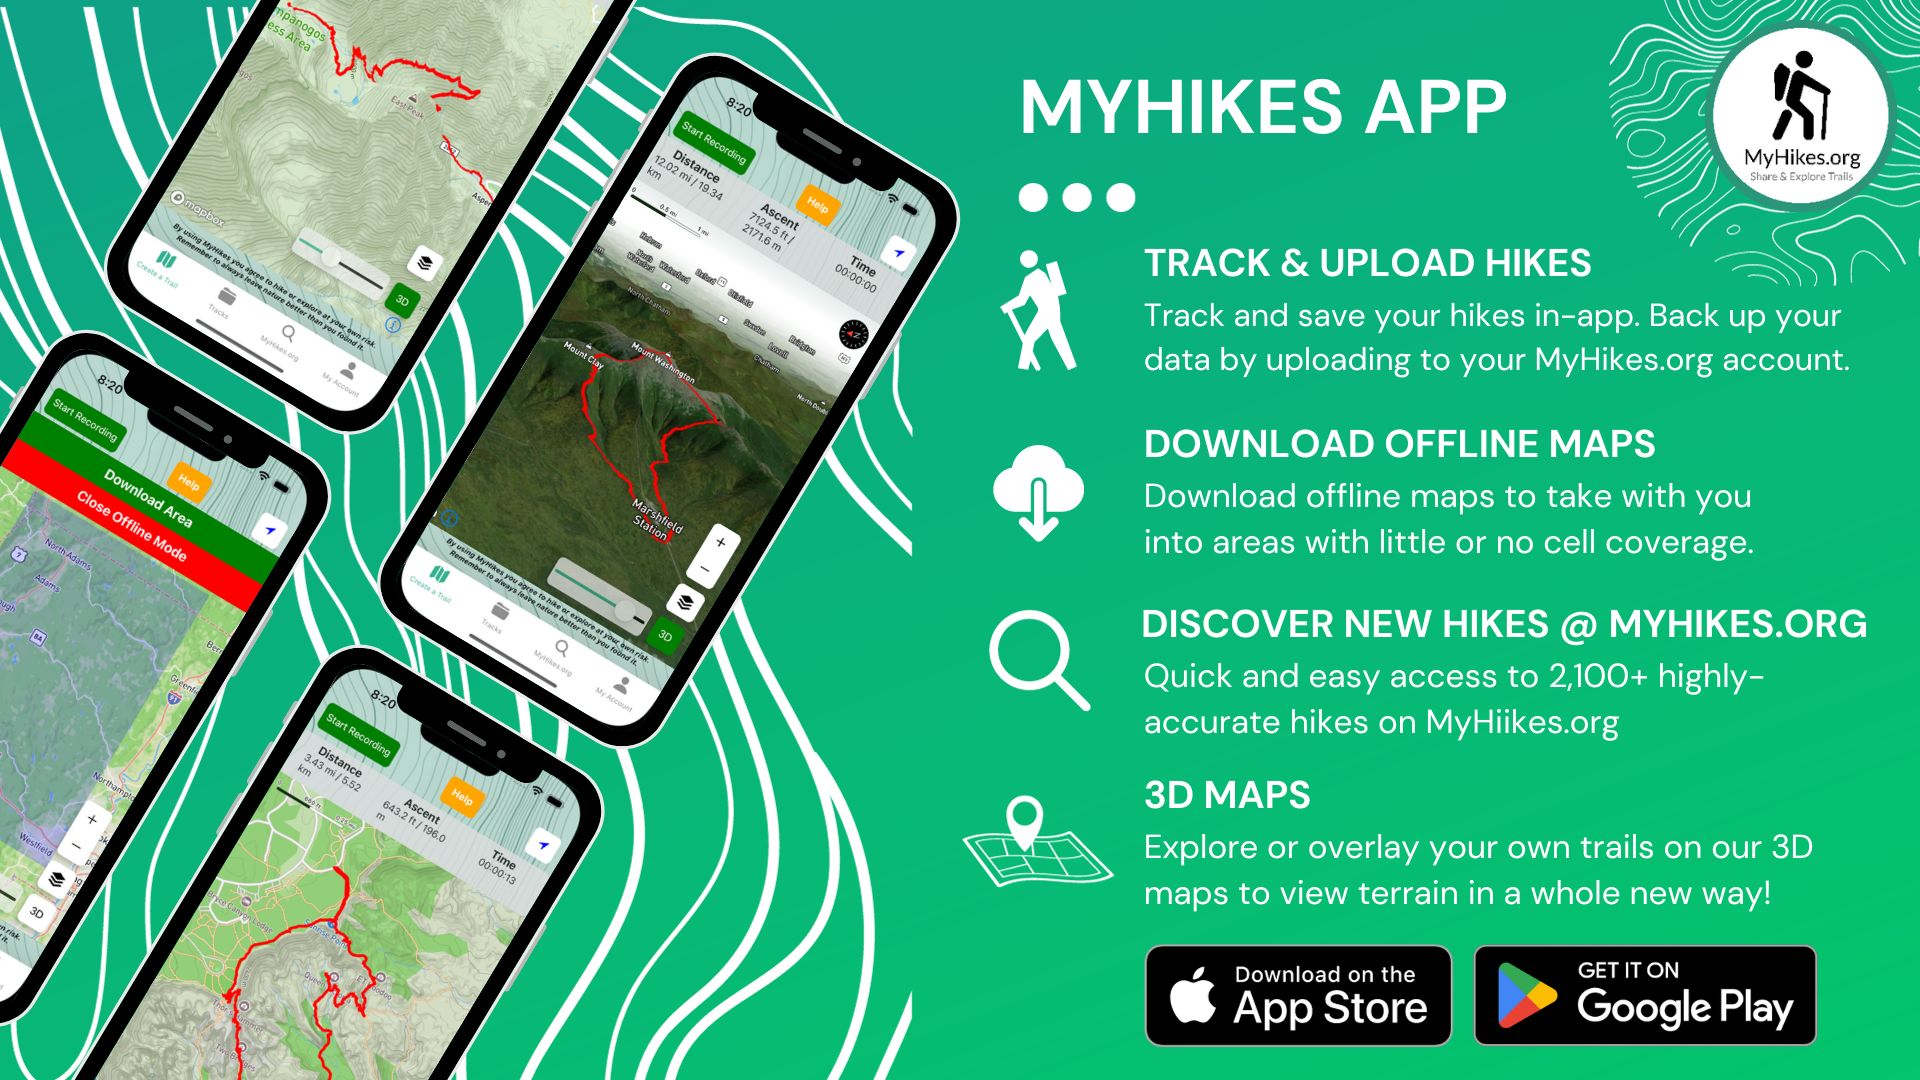 MyHikes mobile app ad